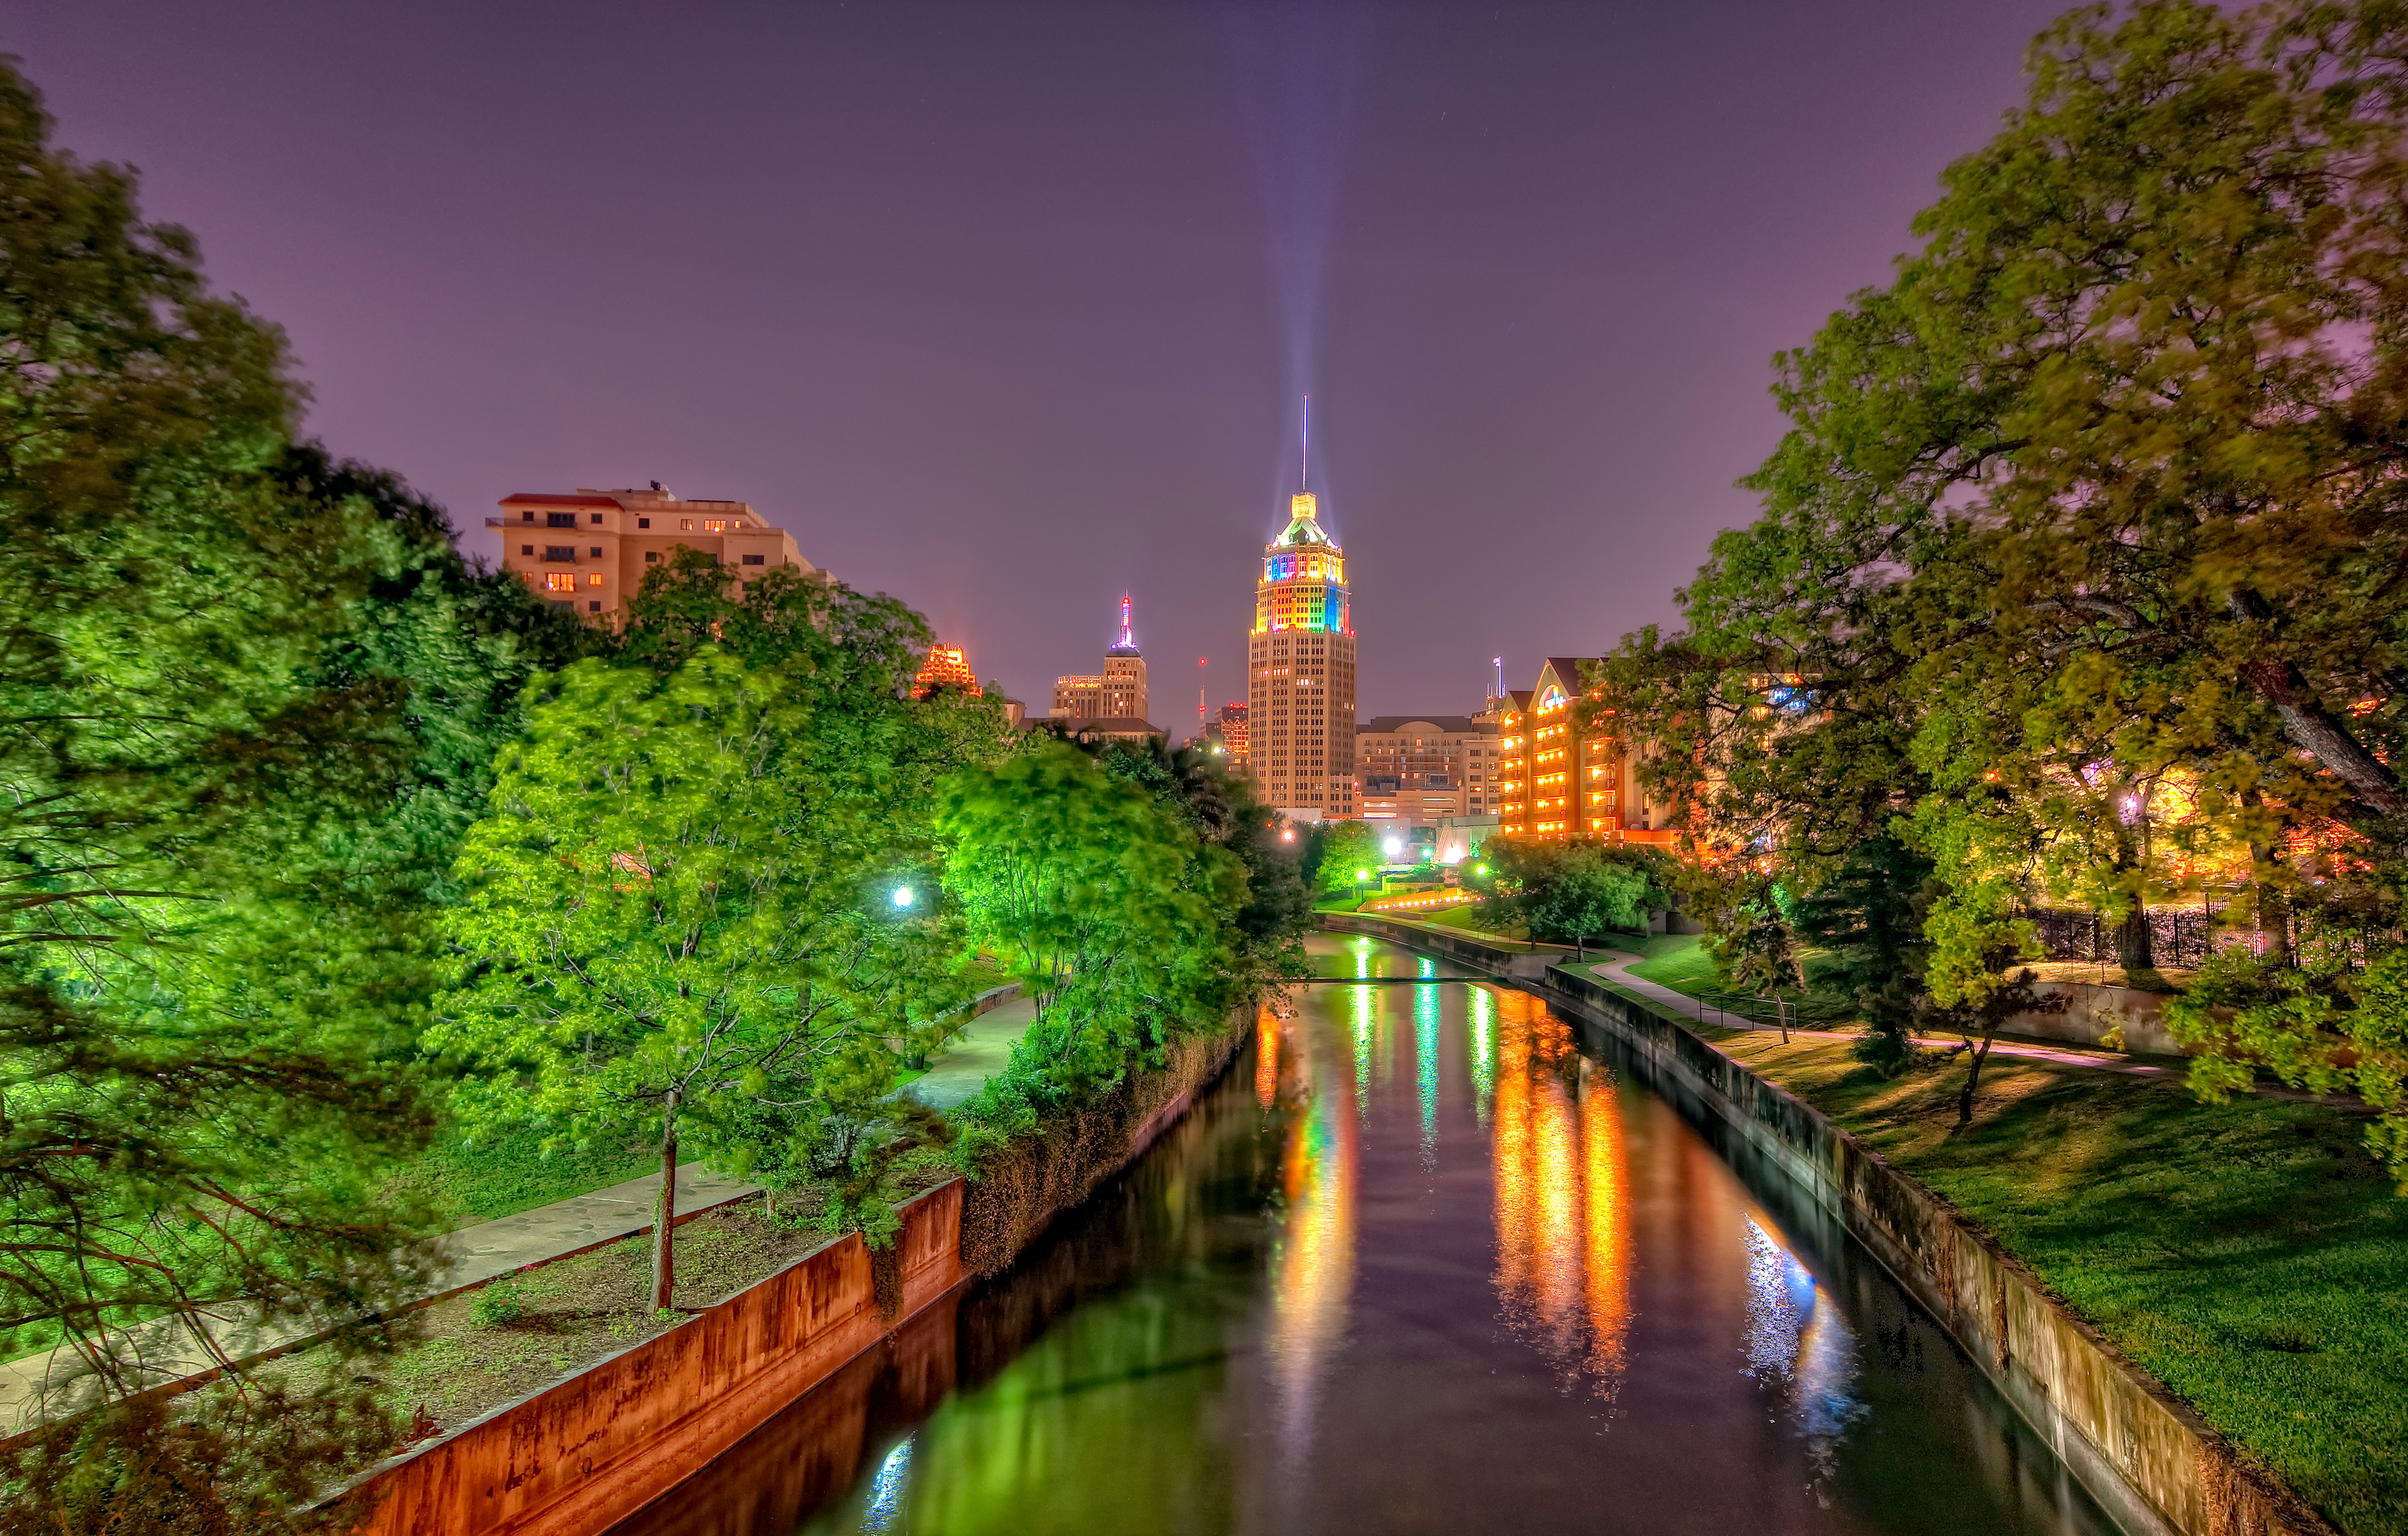 Download wallpapers San Antonio 4k sunset modern buildings american  cities Texas cityscapes America USA City of San Antonio HDR for  desktop with resolution 3840x2400 High Quality HD pictures wallpapers